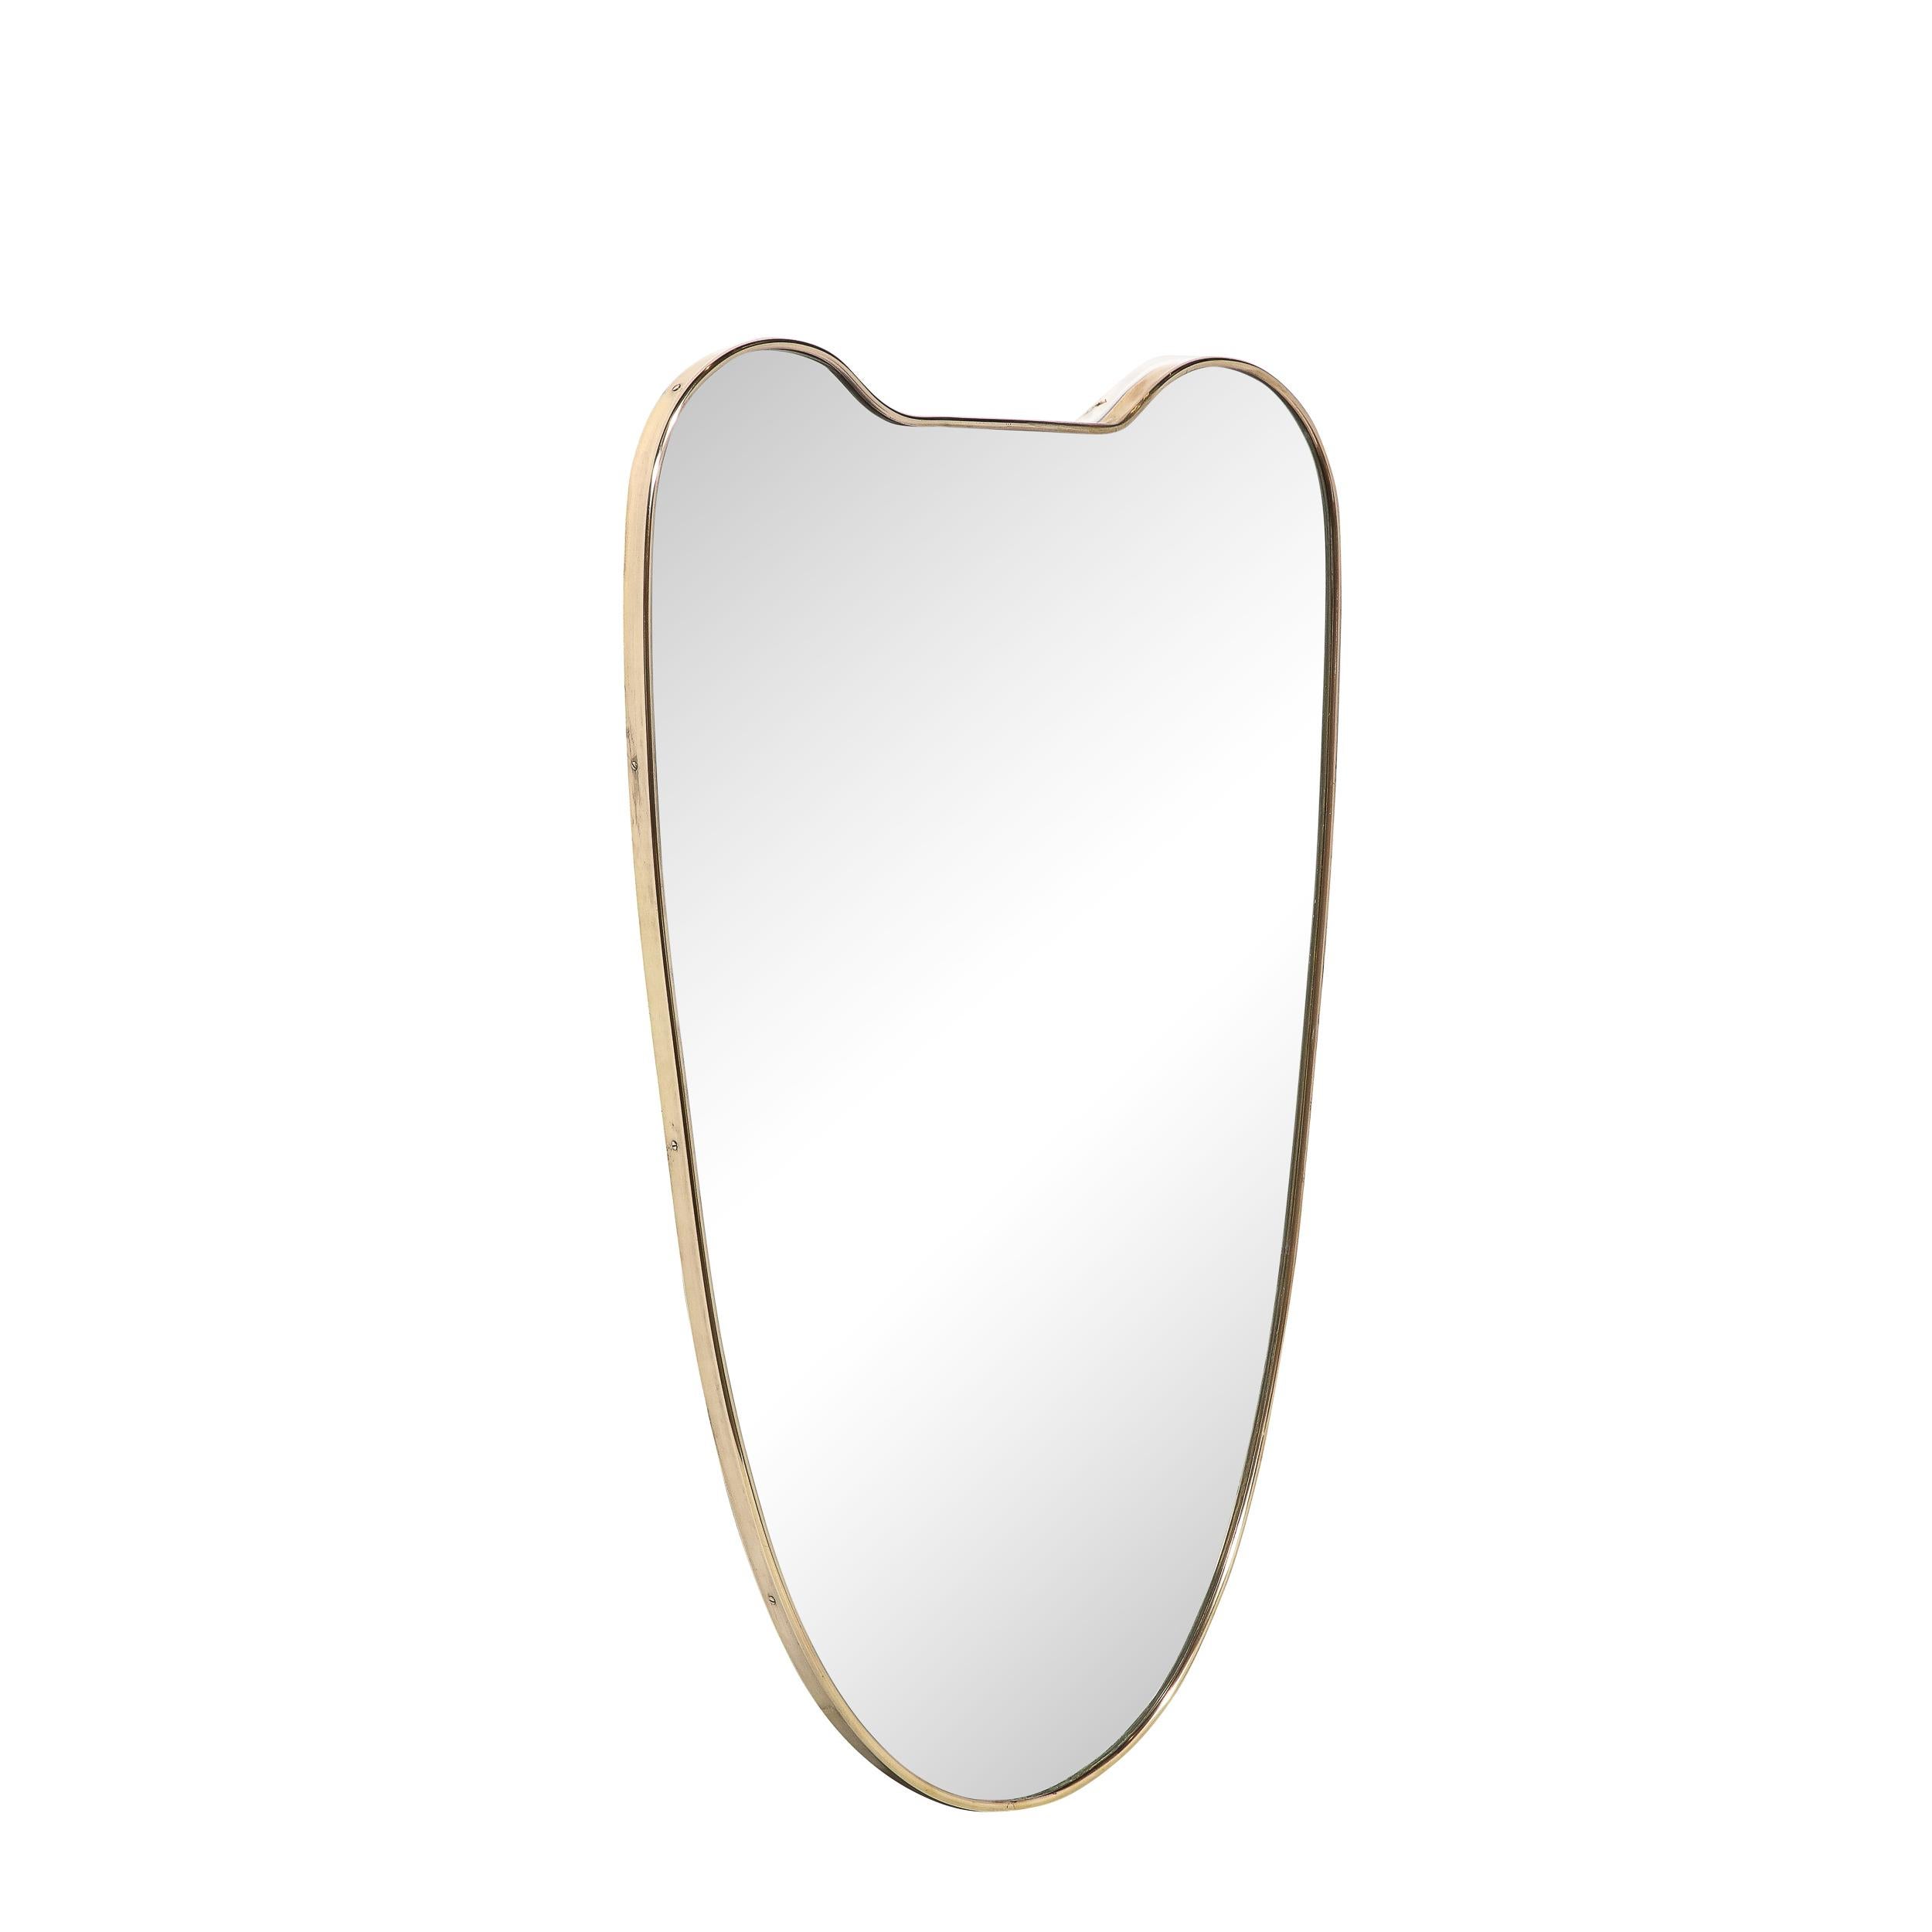 This minimal and beautifully made Mid-Century Modernist Brass Wrapped Shield Form Mirror originates from Italy, Circa 1960. Features a stunning heraldic shield form silhouette with rounded top corners and a beautifully curved lower section.